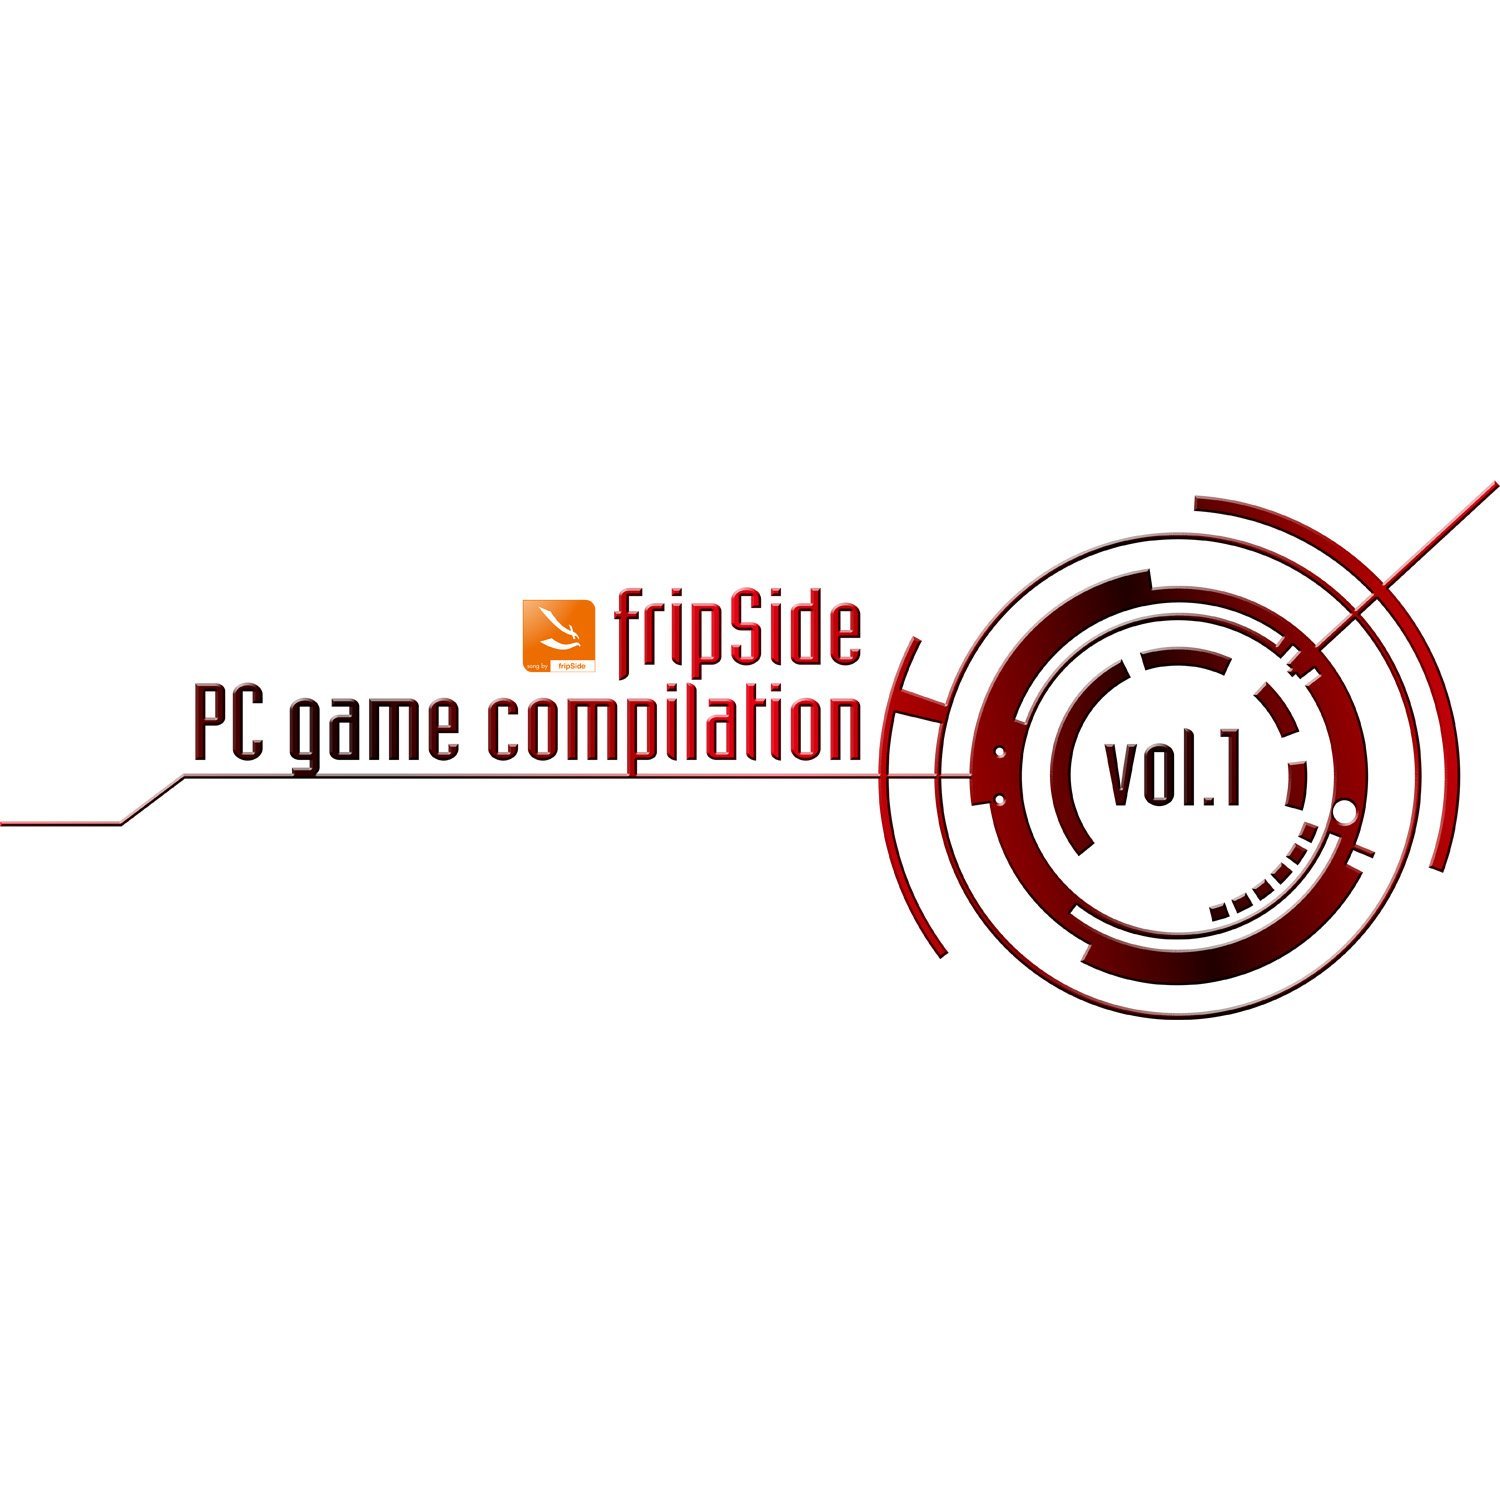 FripSide PC game compilation vol1.jpg